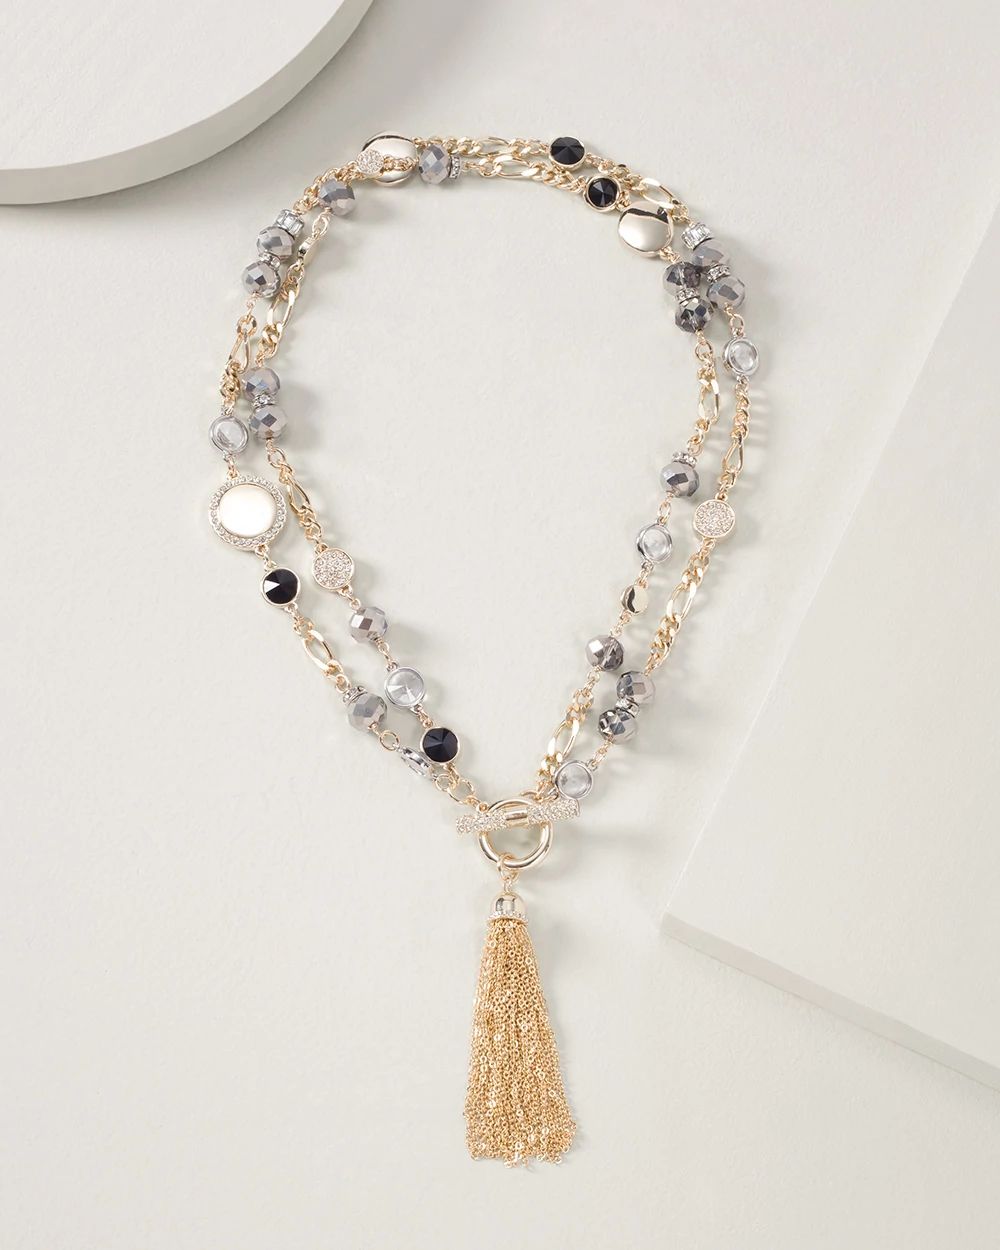 Gold Beaded Convertible Tassel Necklace click to view larger image.